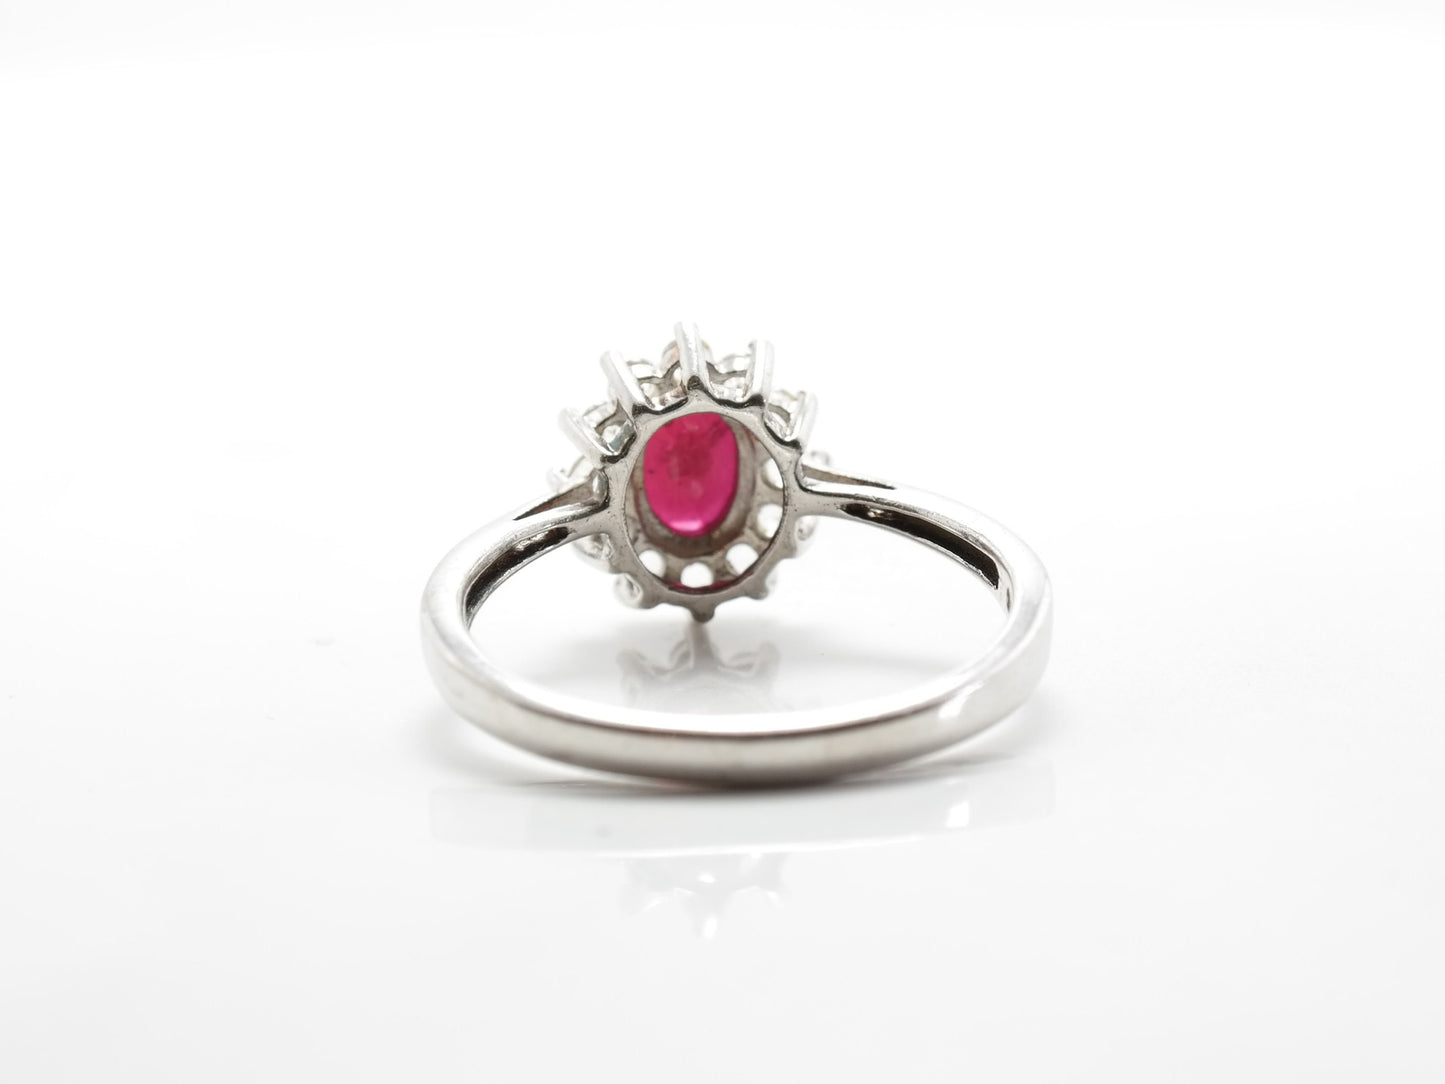 Vintage Sterling Silver Ring Pink Ruby White Topaz Size 9